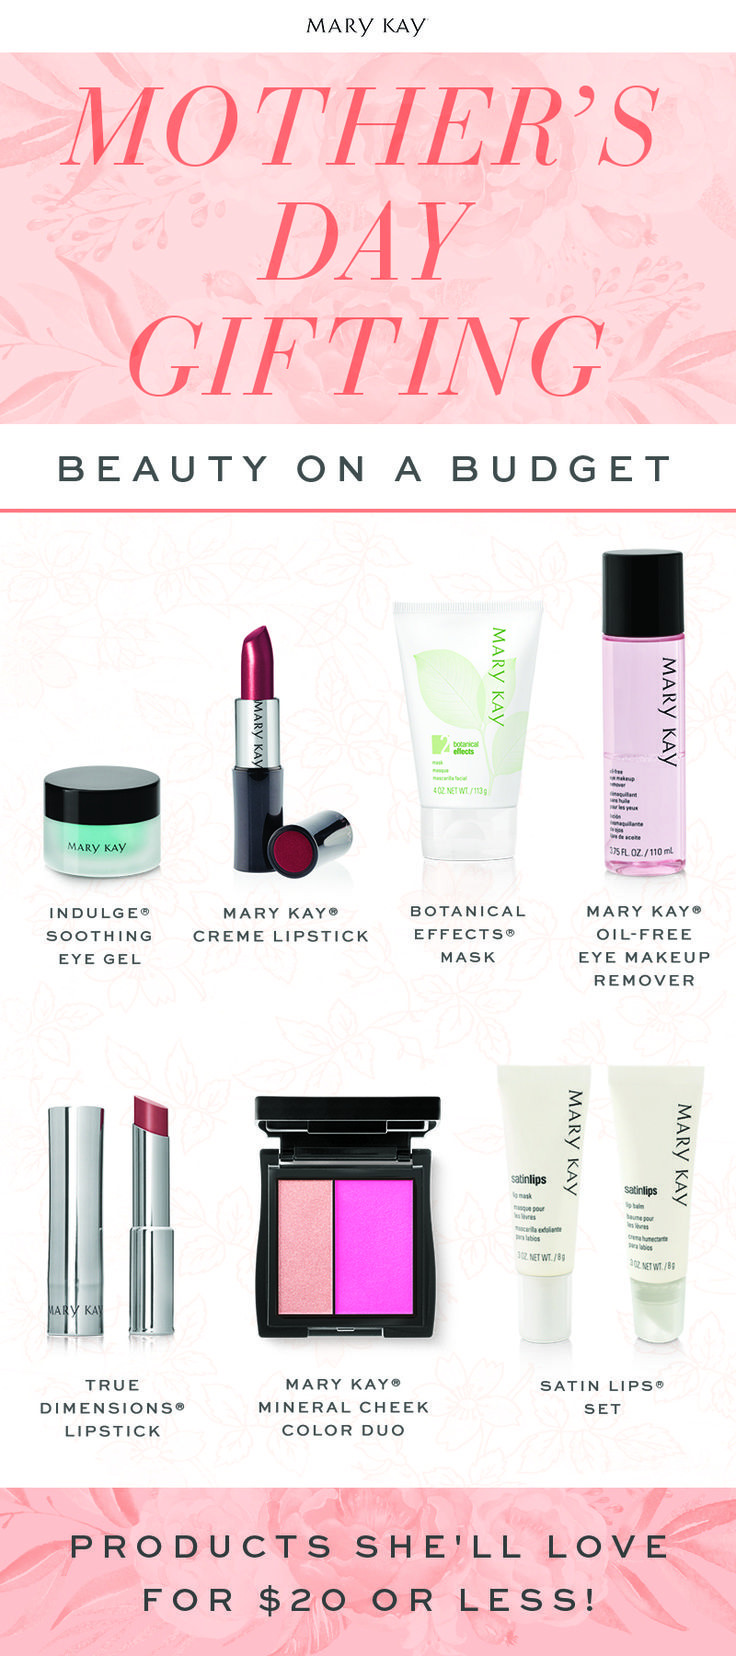 Mary Kay Mother'S Day Gift Ideas
 18 best images about Mary Kay Mother s Day Promotion